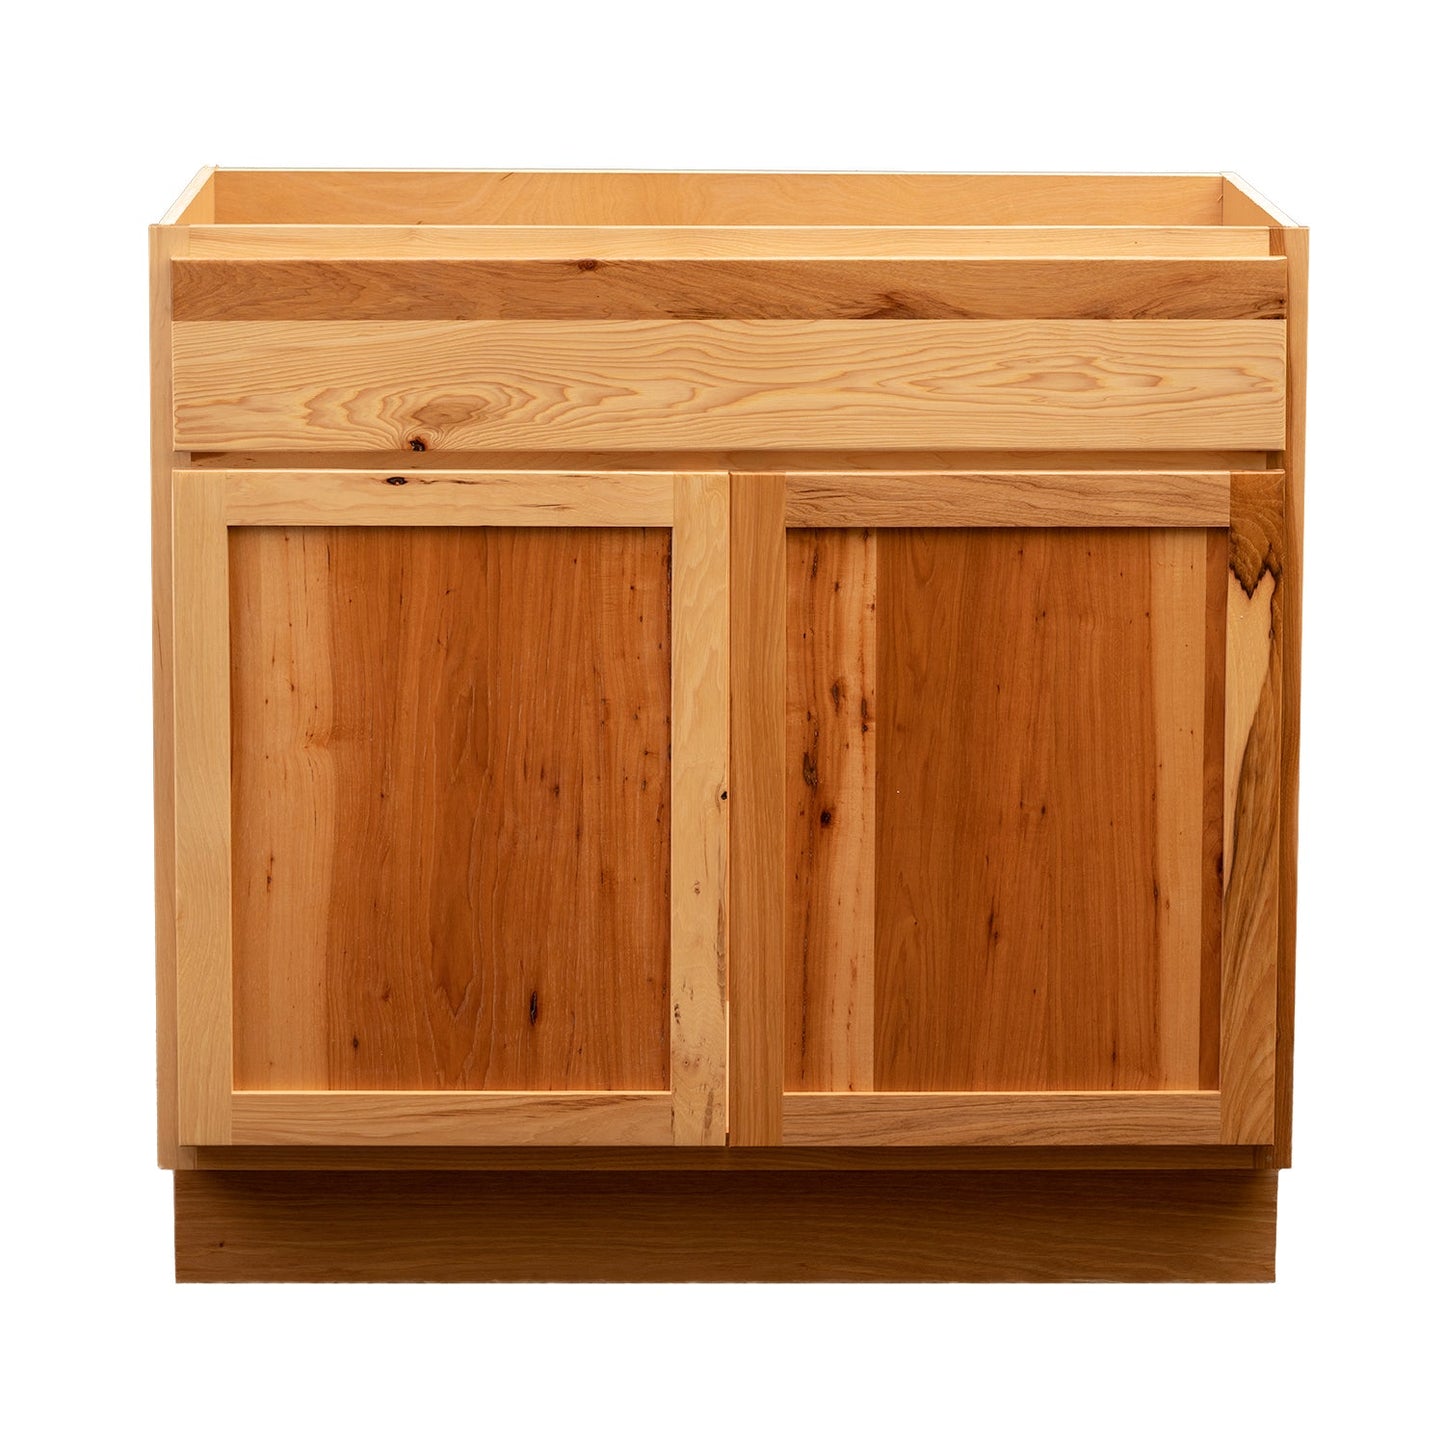 Quicklock RTA (Ready-to-Assemble) Rustic Hickory Vanity Base Cabinet | 24"Wx34.5"Hx18"D